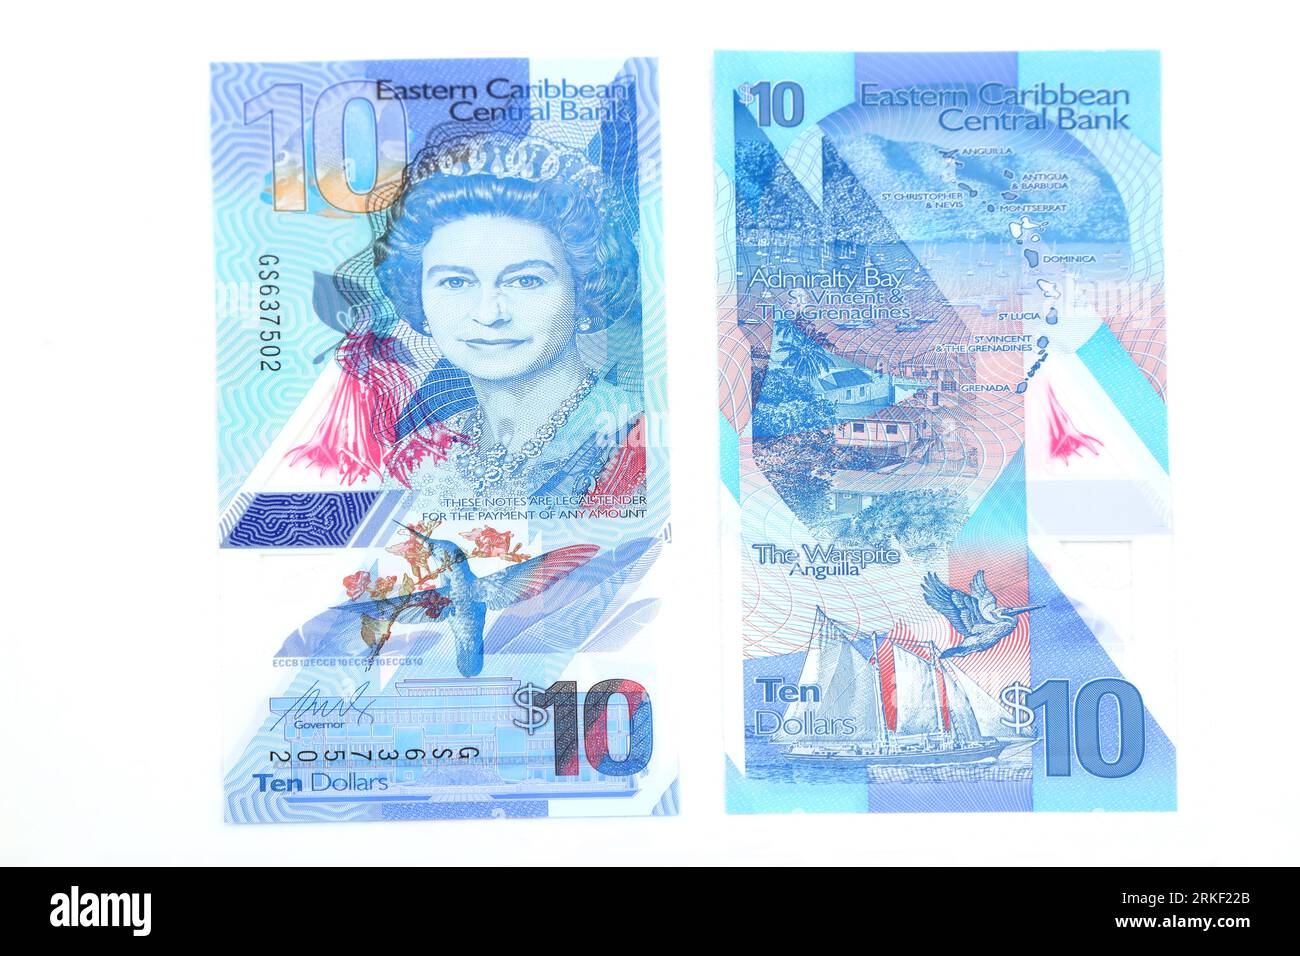 Eastern Caribbean Central Bank Polymer Dollars  2019 issue Vertical Format 10 Dollars Reverse Side Showing Admiralty Bay and Map of the Eastern Caribb Stock Photo